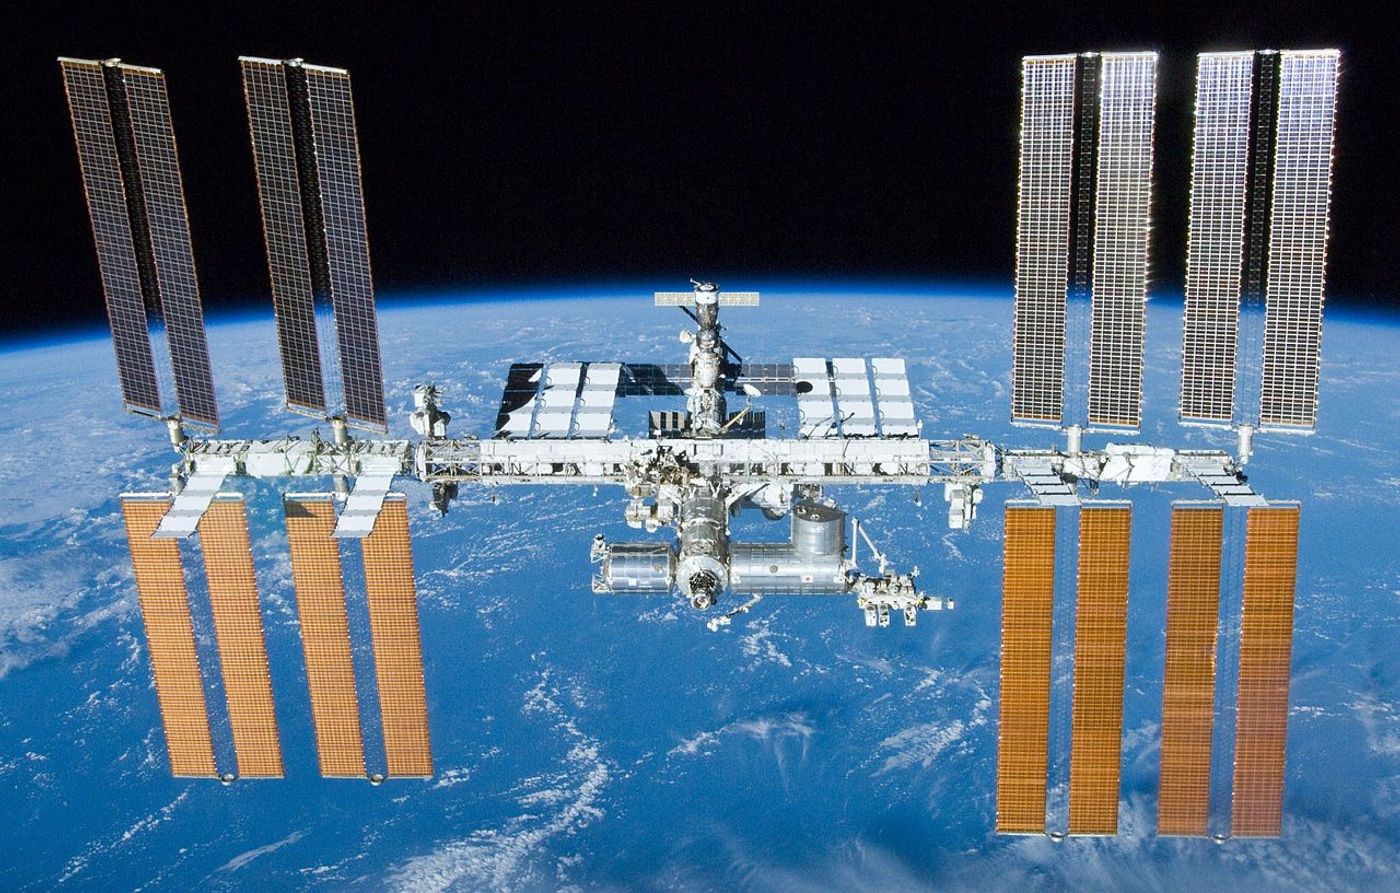 NASA has a method for removing trash from the closely-orbiting International Space Station, but not so much for future deep space missions.